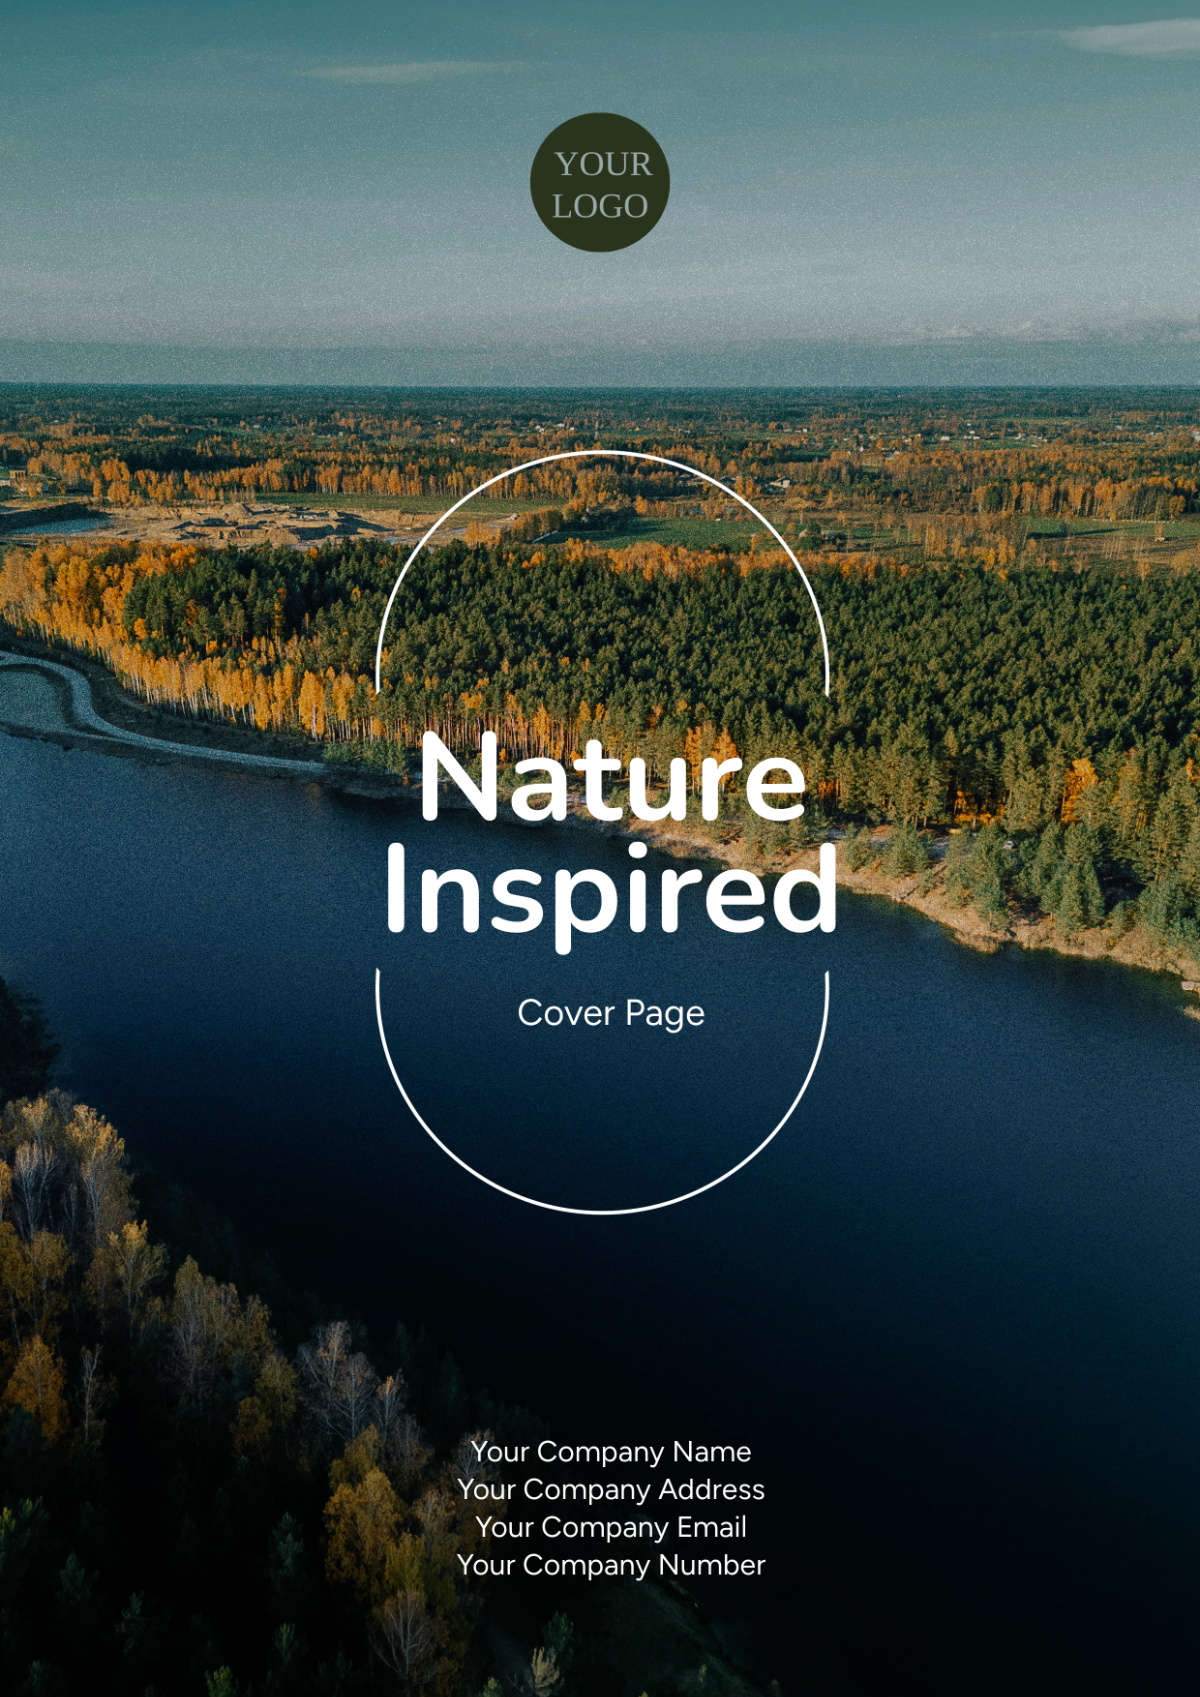 Nature-Inspired Title Cover Page